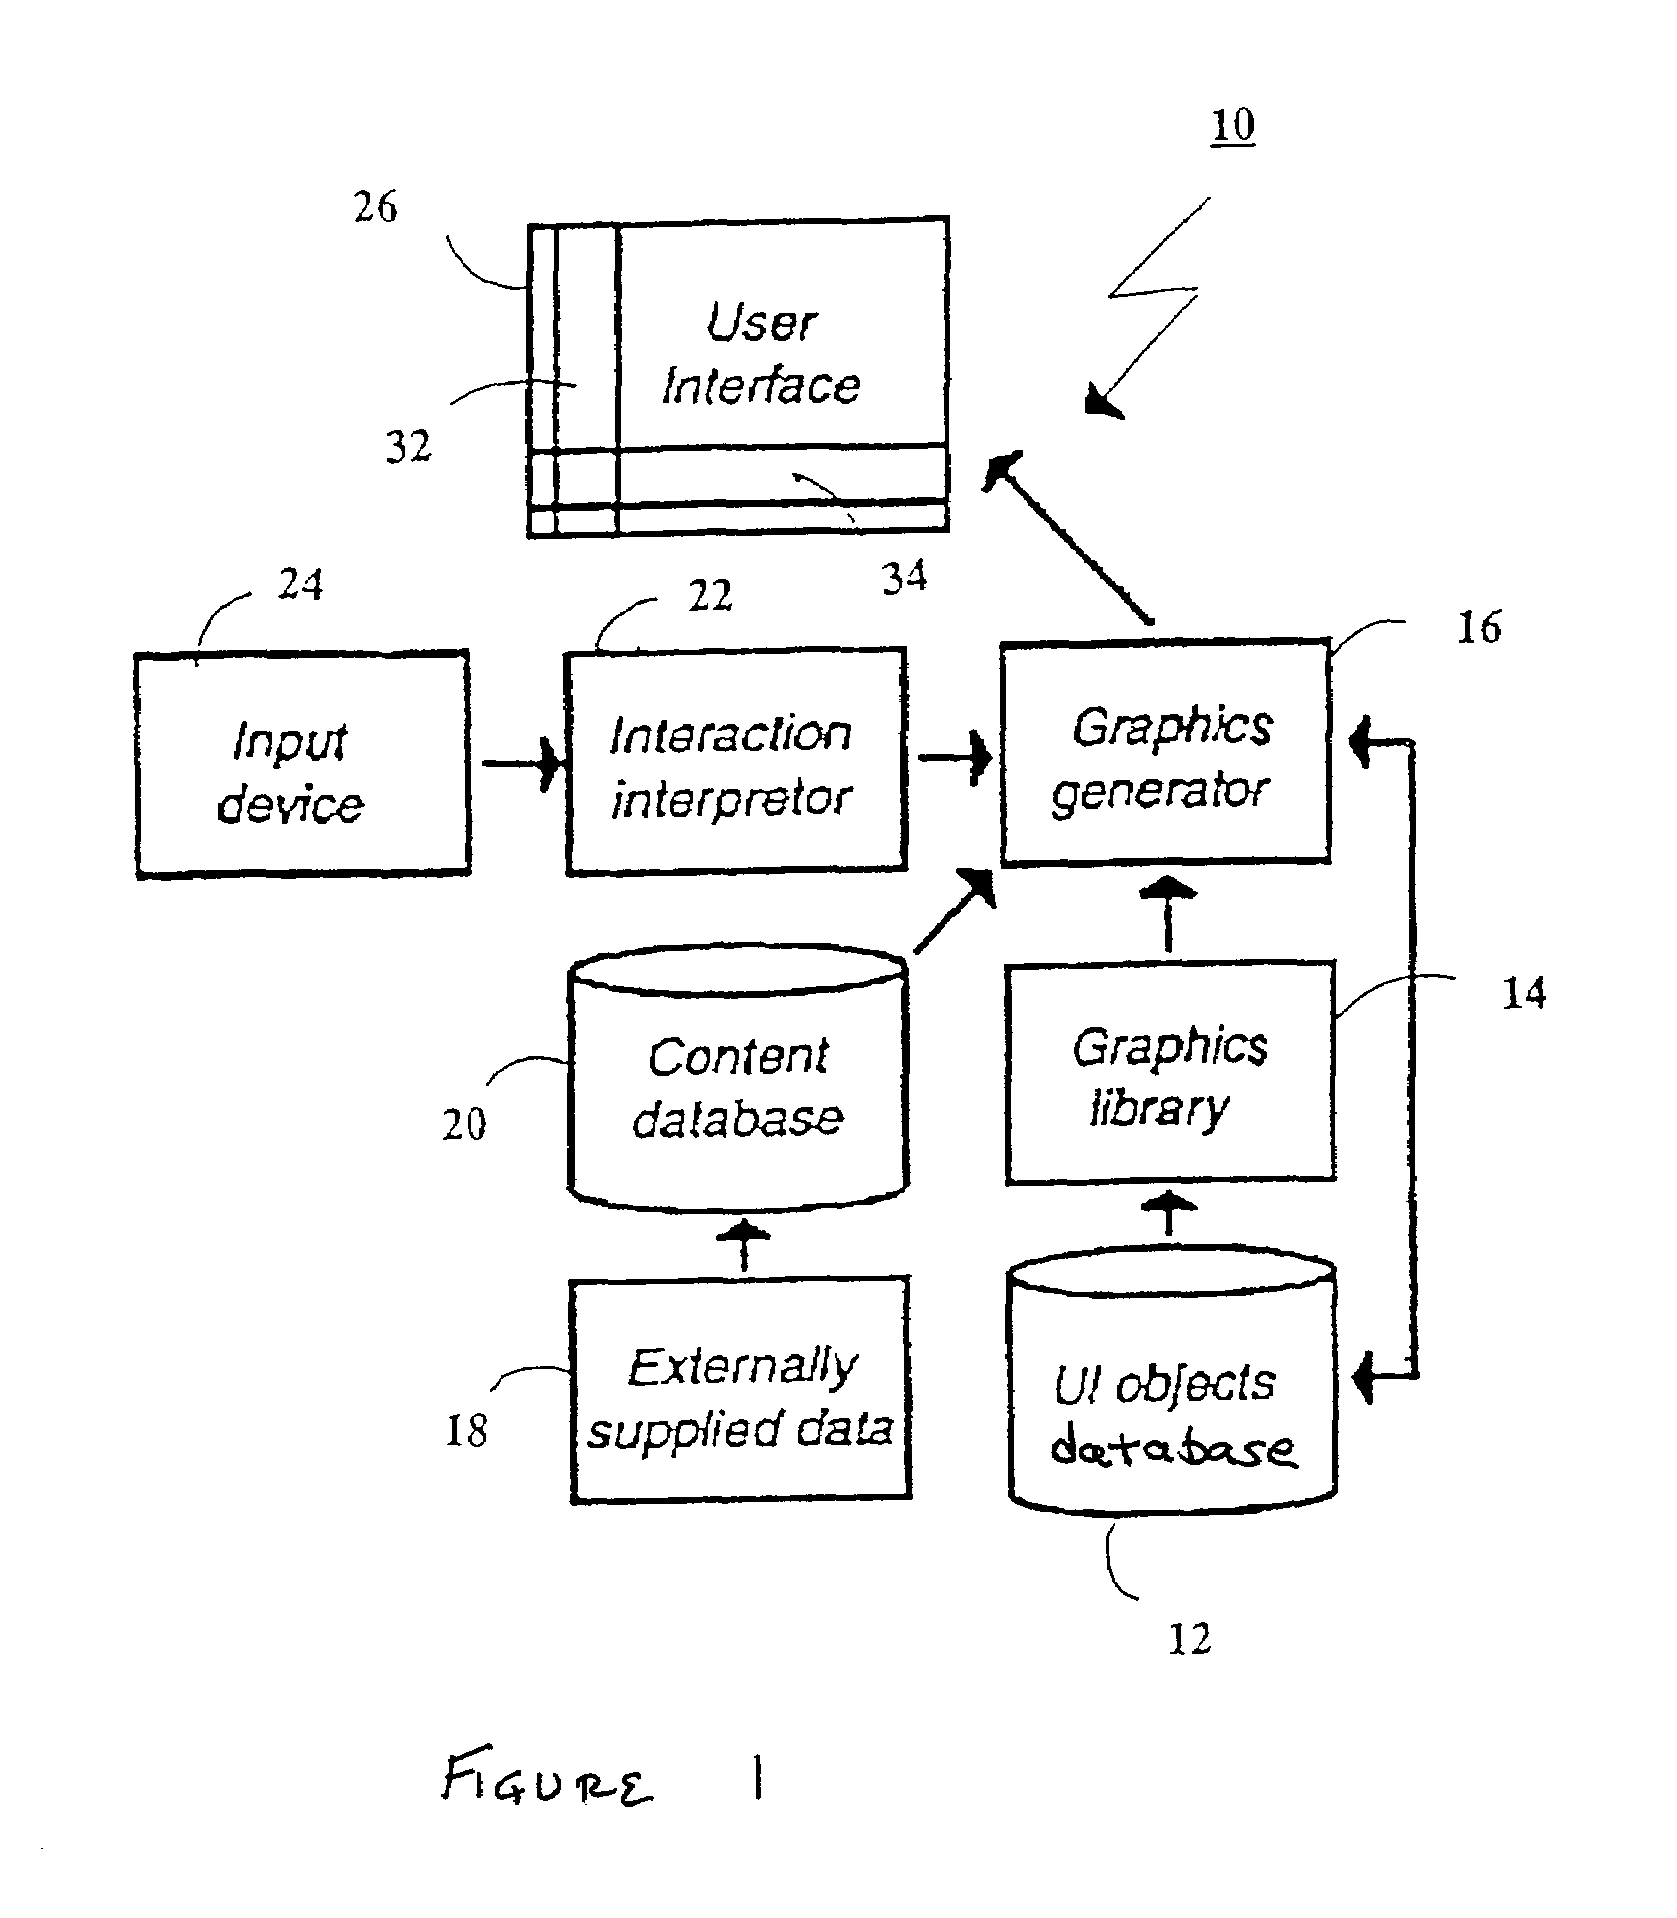 Method and apparatus for scrollable cross-point navigation in a user interface